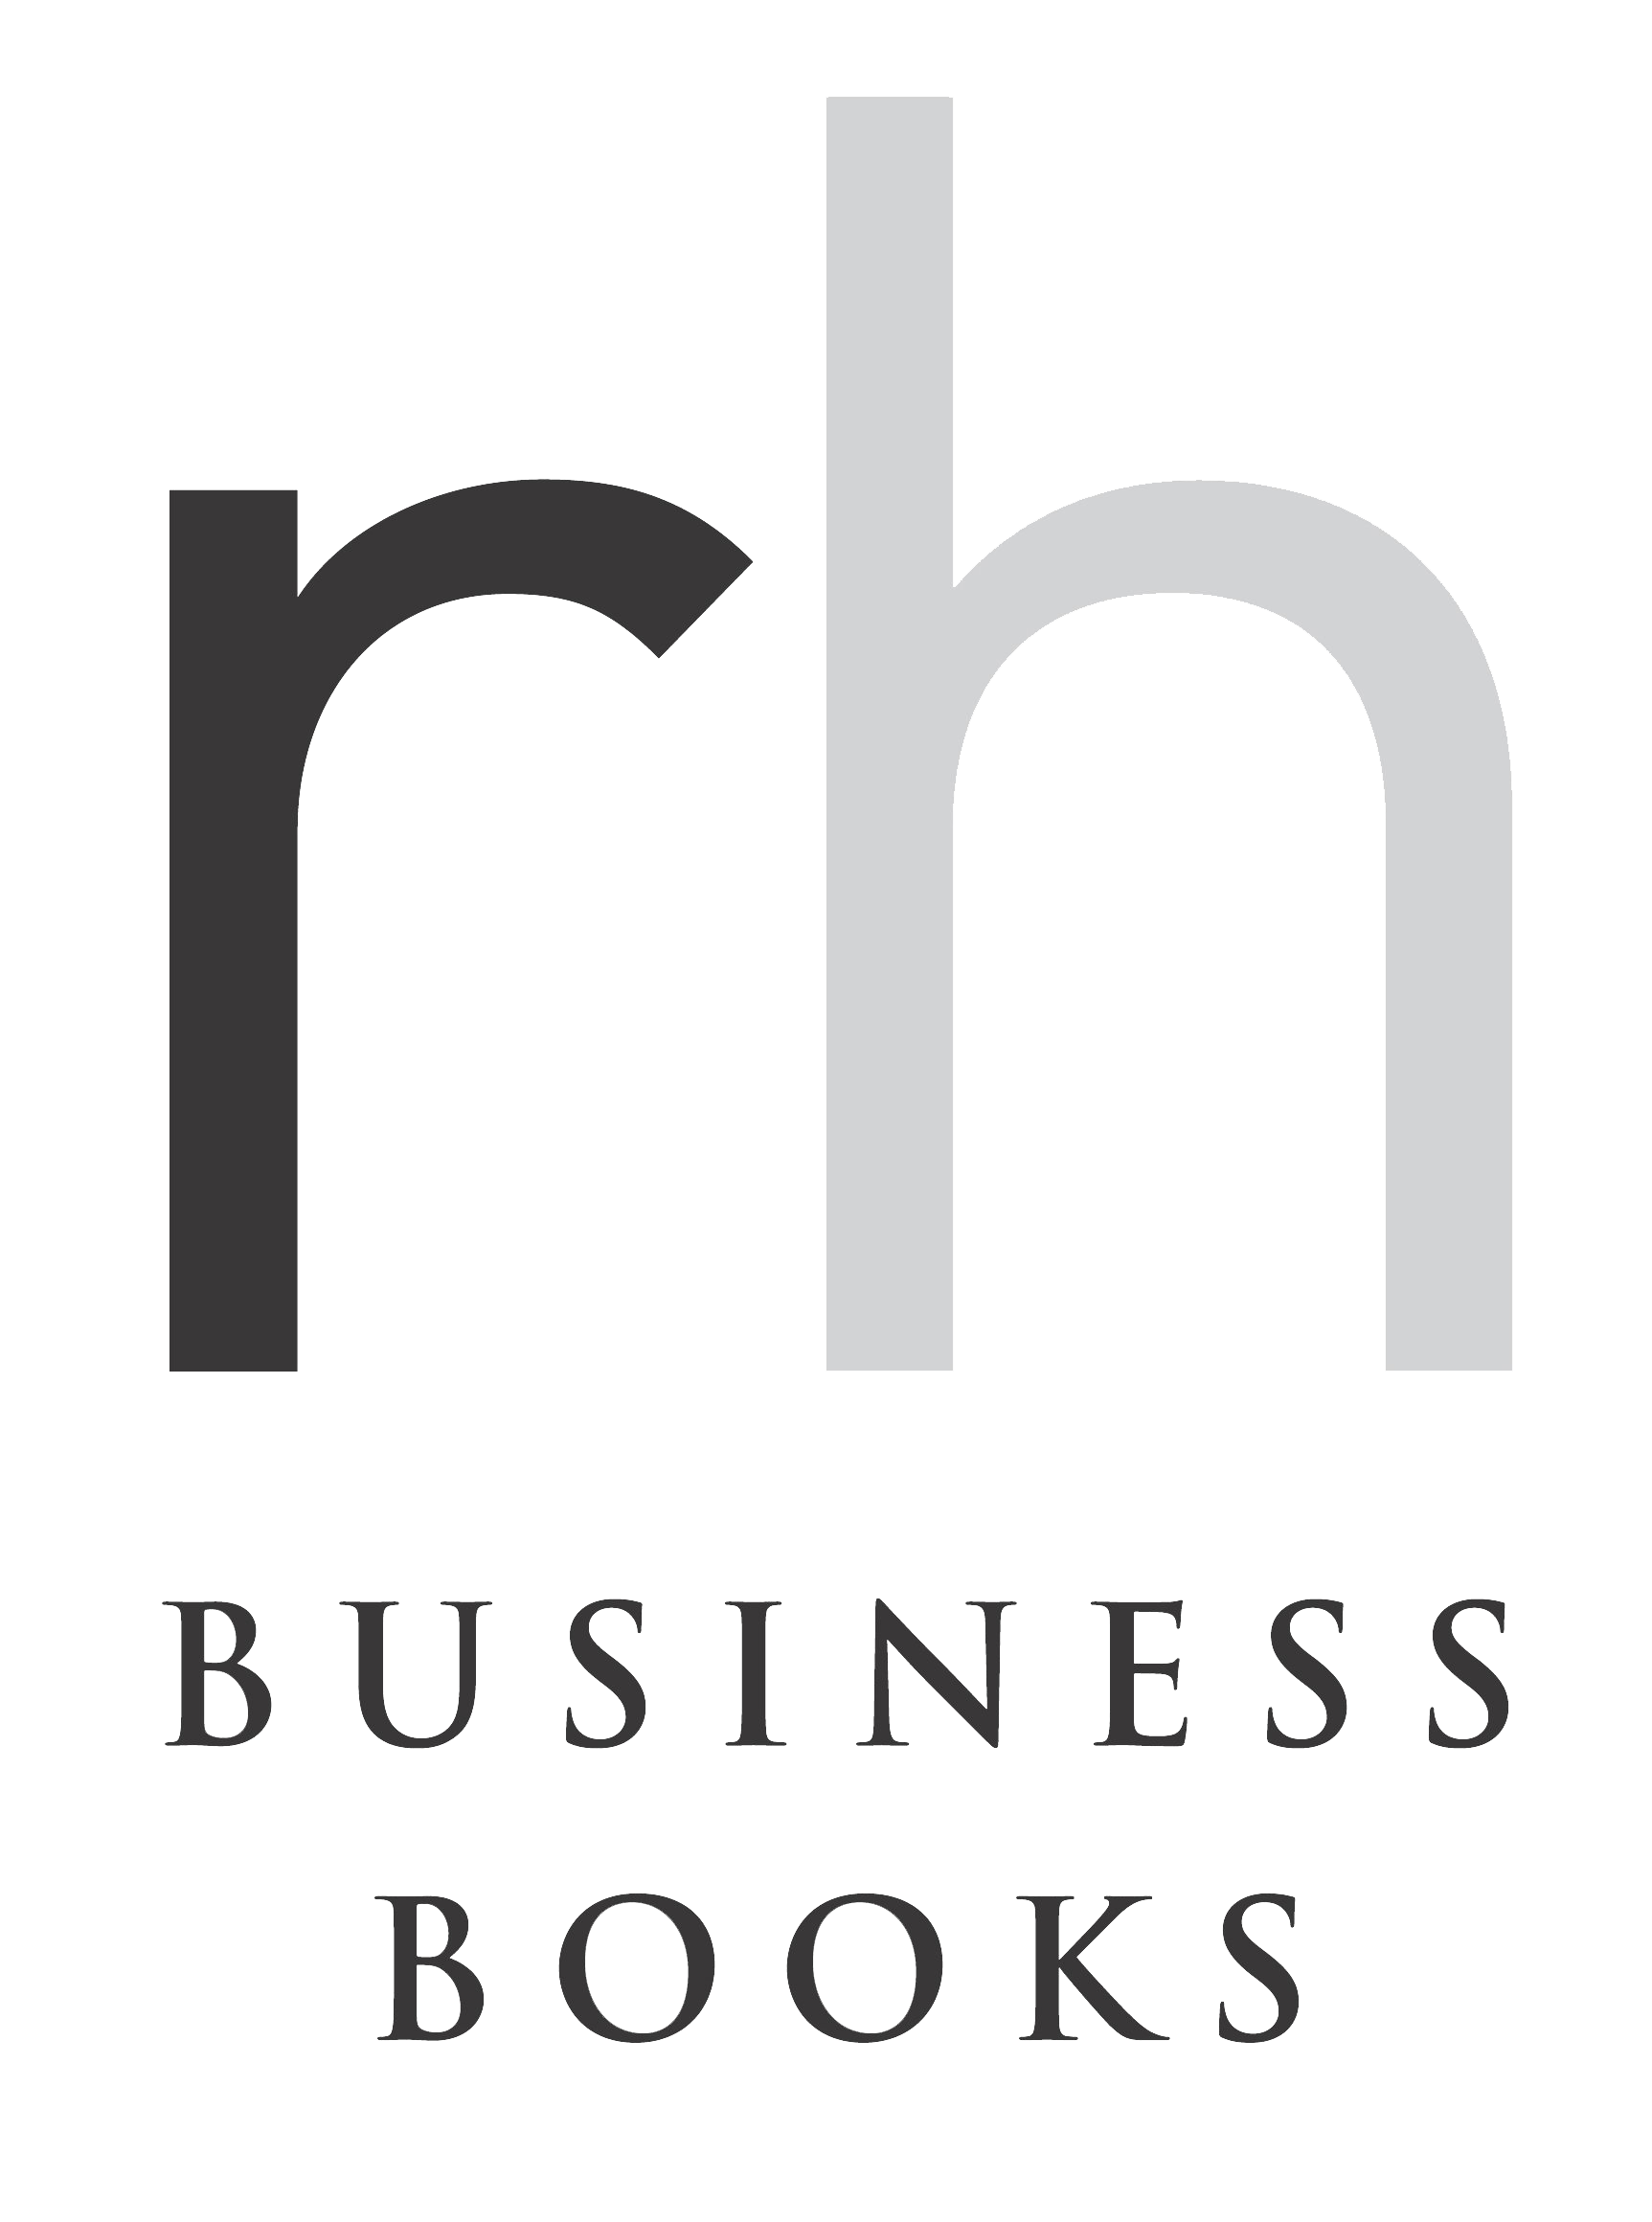 rh_business_books.png